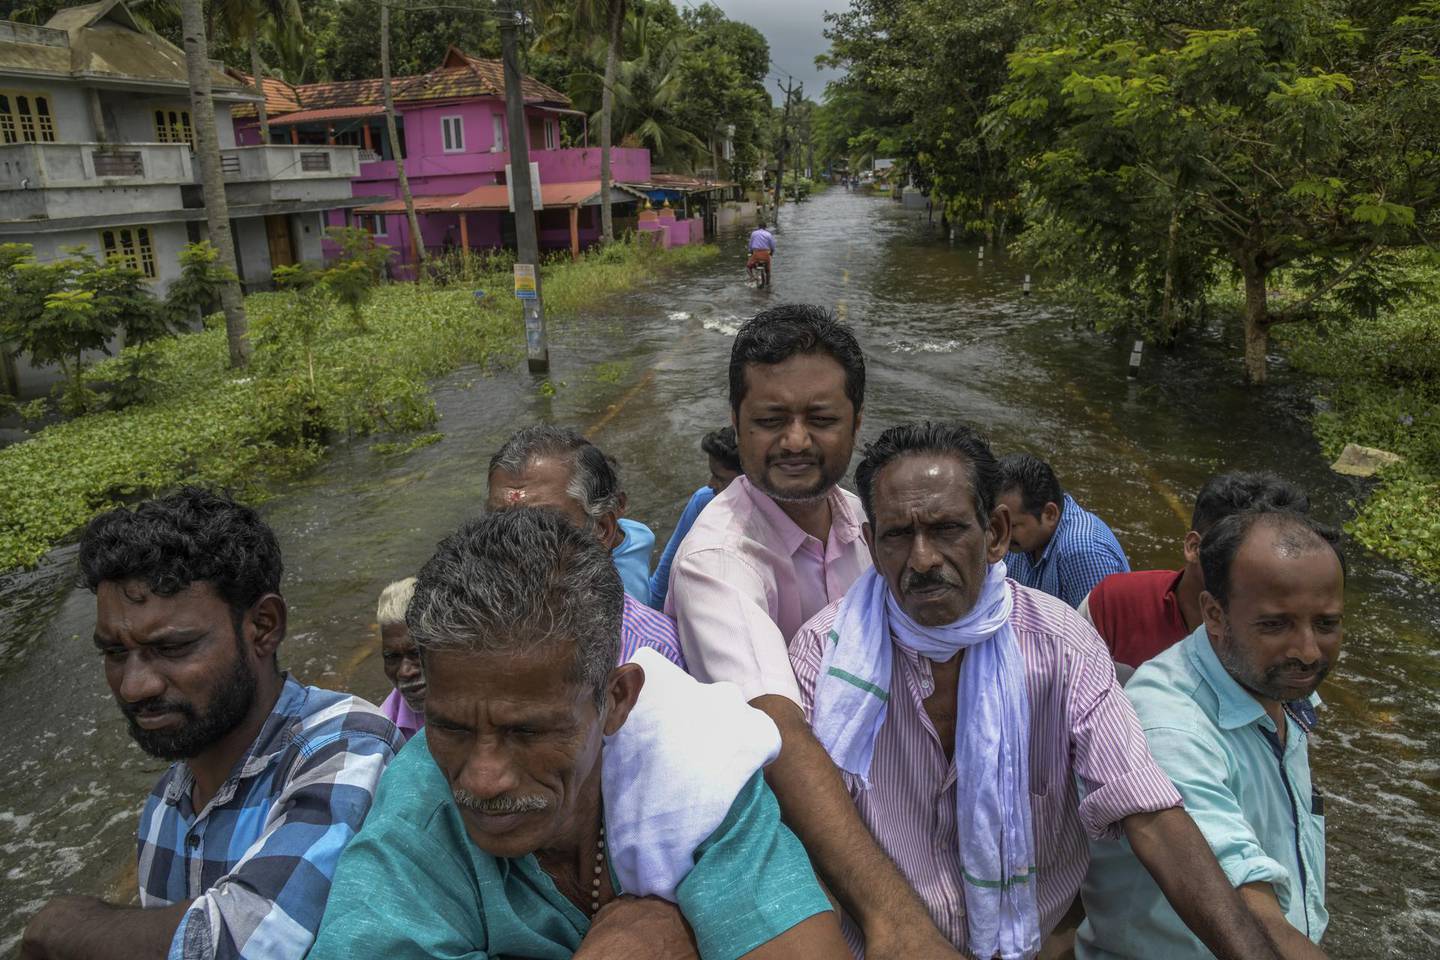 KERALA, INDIA - AUGUST 20: Locals cross the flood water after taking the lift on the rescue truck on August 20, 2018 in Chengannur, India. Over 350 people have reportedly died in the southern Indian state of Kerala after weeks of monsoon rains which caused the worst flooding in nearly a century. Officials said more than 800,000 people have been displaced and taken shelter in around 4,000 relief camps across Kerala as the Indian armed forces step up efforts to rescue thousands of stranded people and get relief supplies to isolated areas.  (Atul Loke/Getty Images)